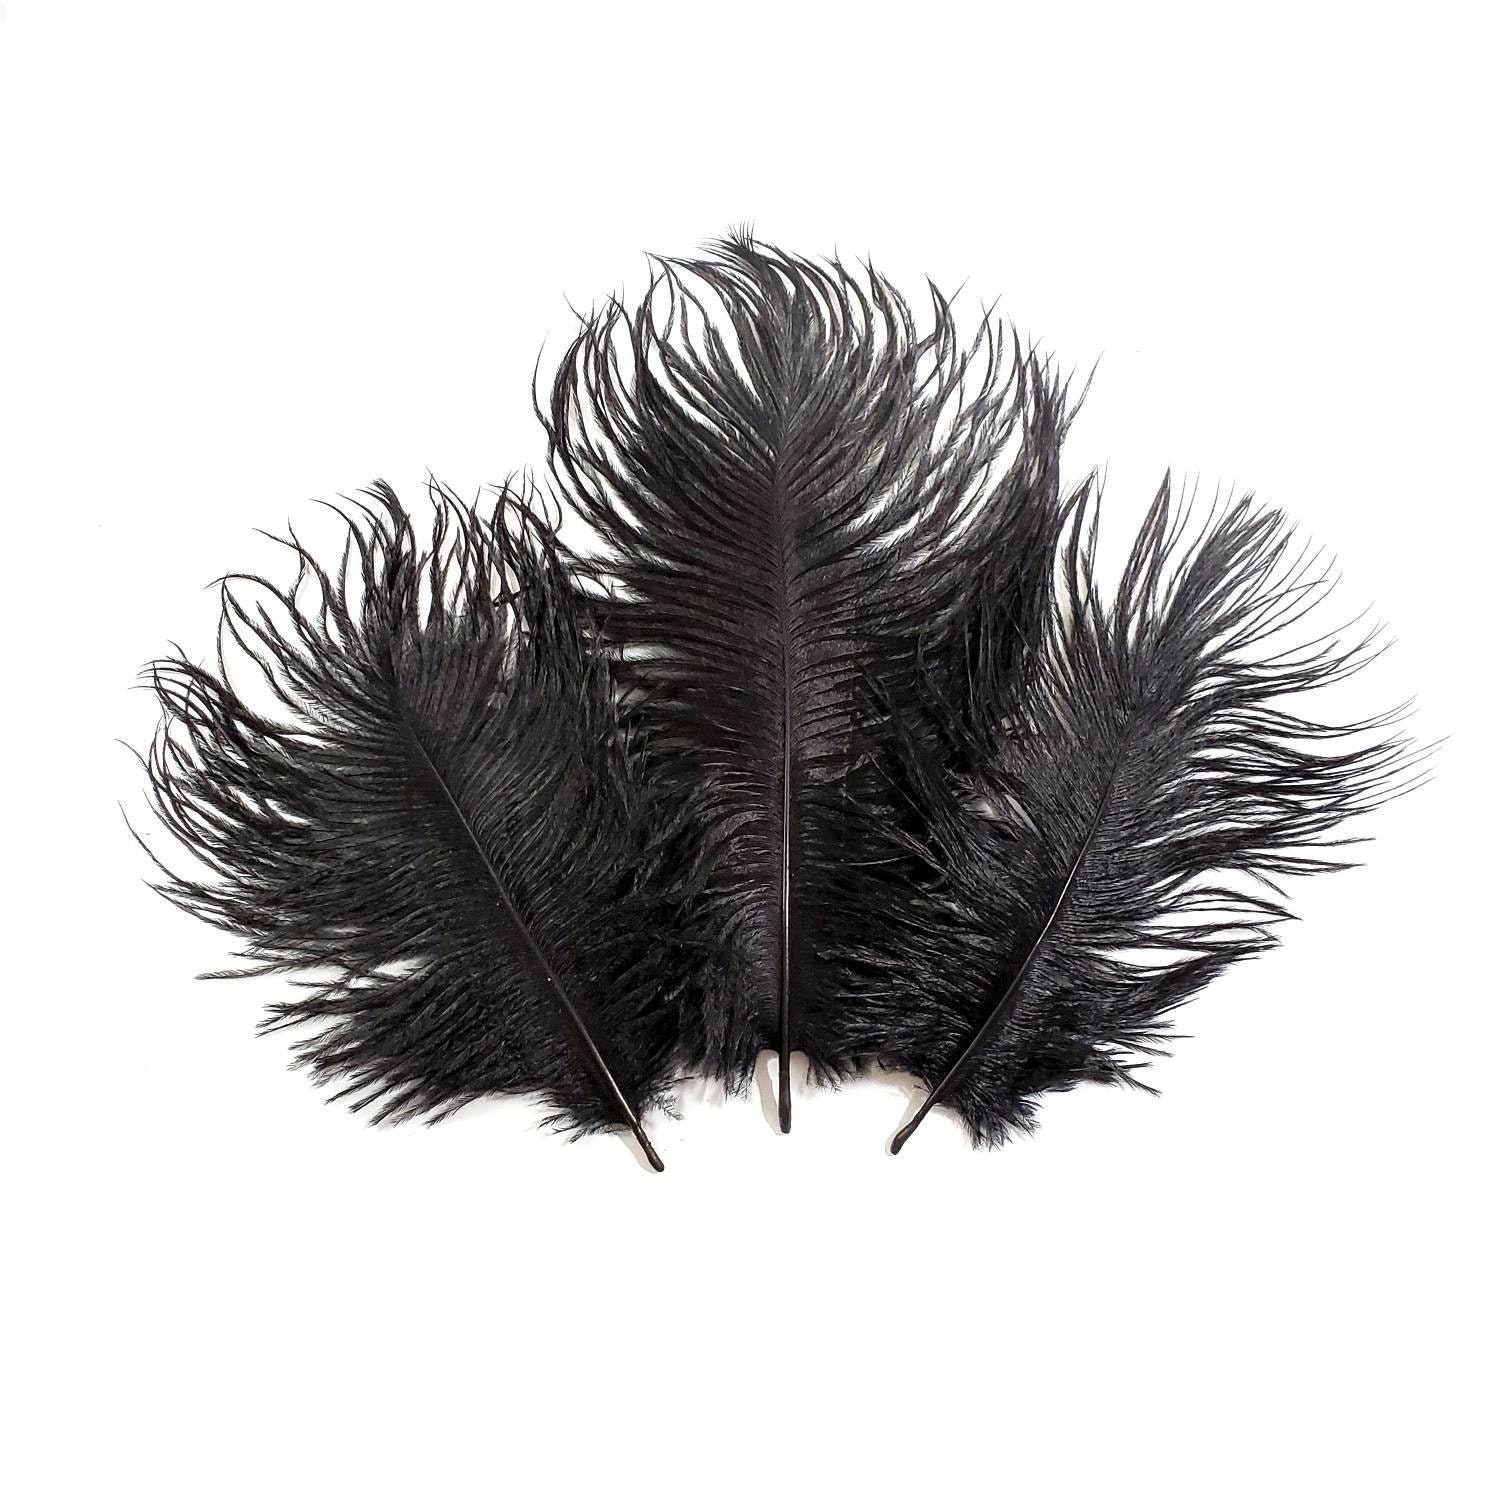 7-9 Inch Black Ostrich Feathers. 5 Black Feathers. Black Bird Feathers.  Center Piece Feathers. Black Wedding Feathers. Black Pen Feathers. 